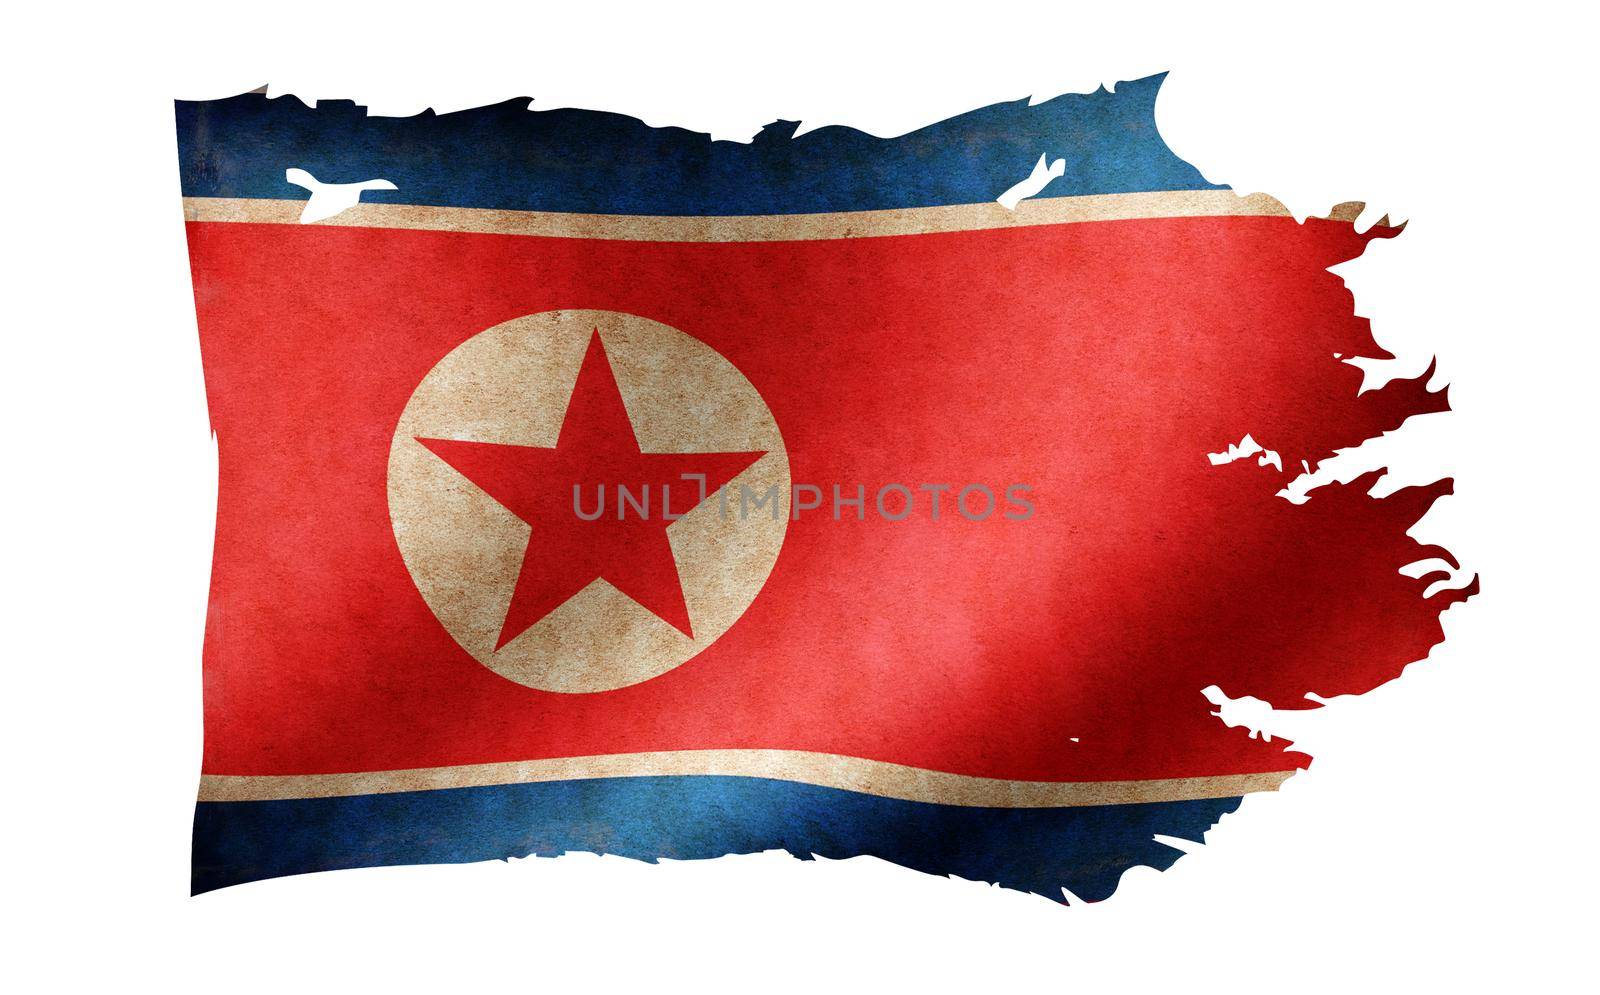 Dirty and torn country flag illustration / North Korea by barks